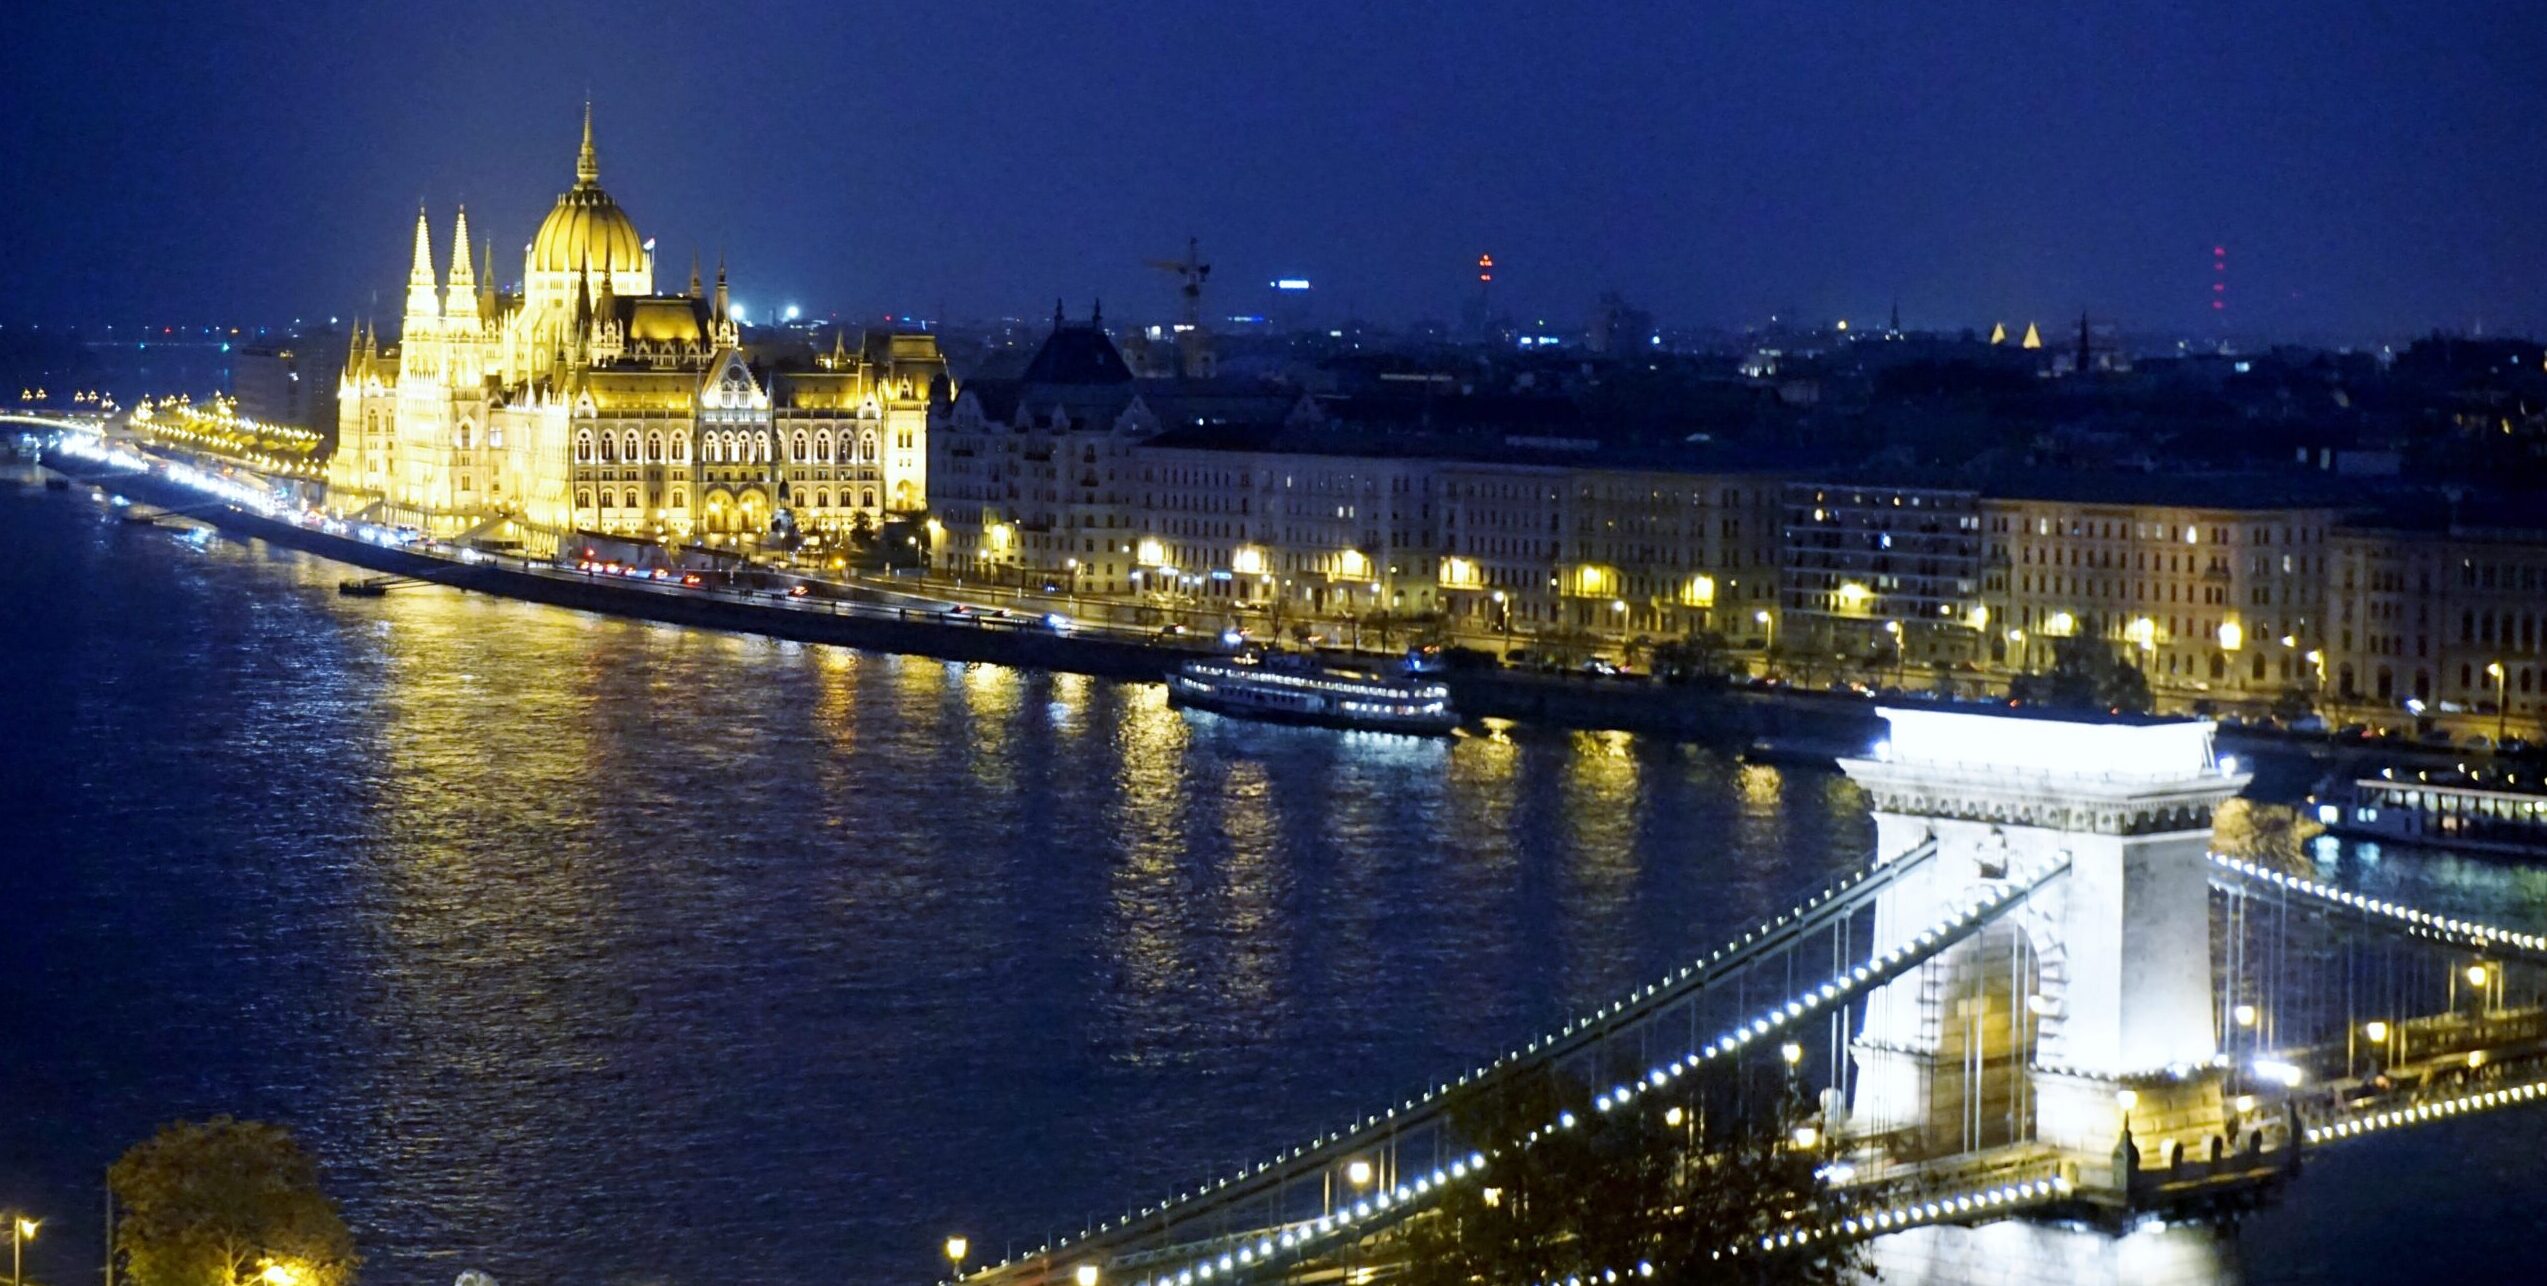 Budapest has lots of famous places to see, making it one of the most visited cities in Eastern Europe